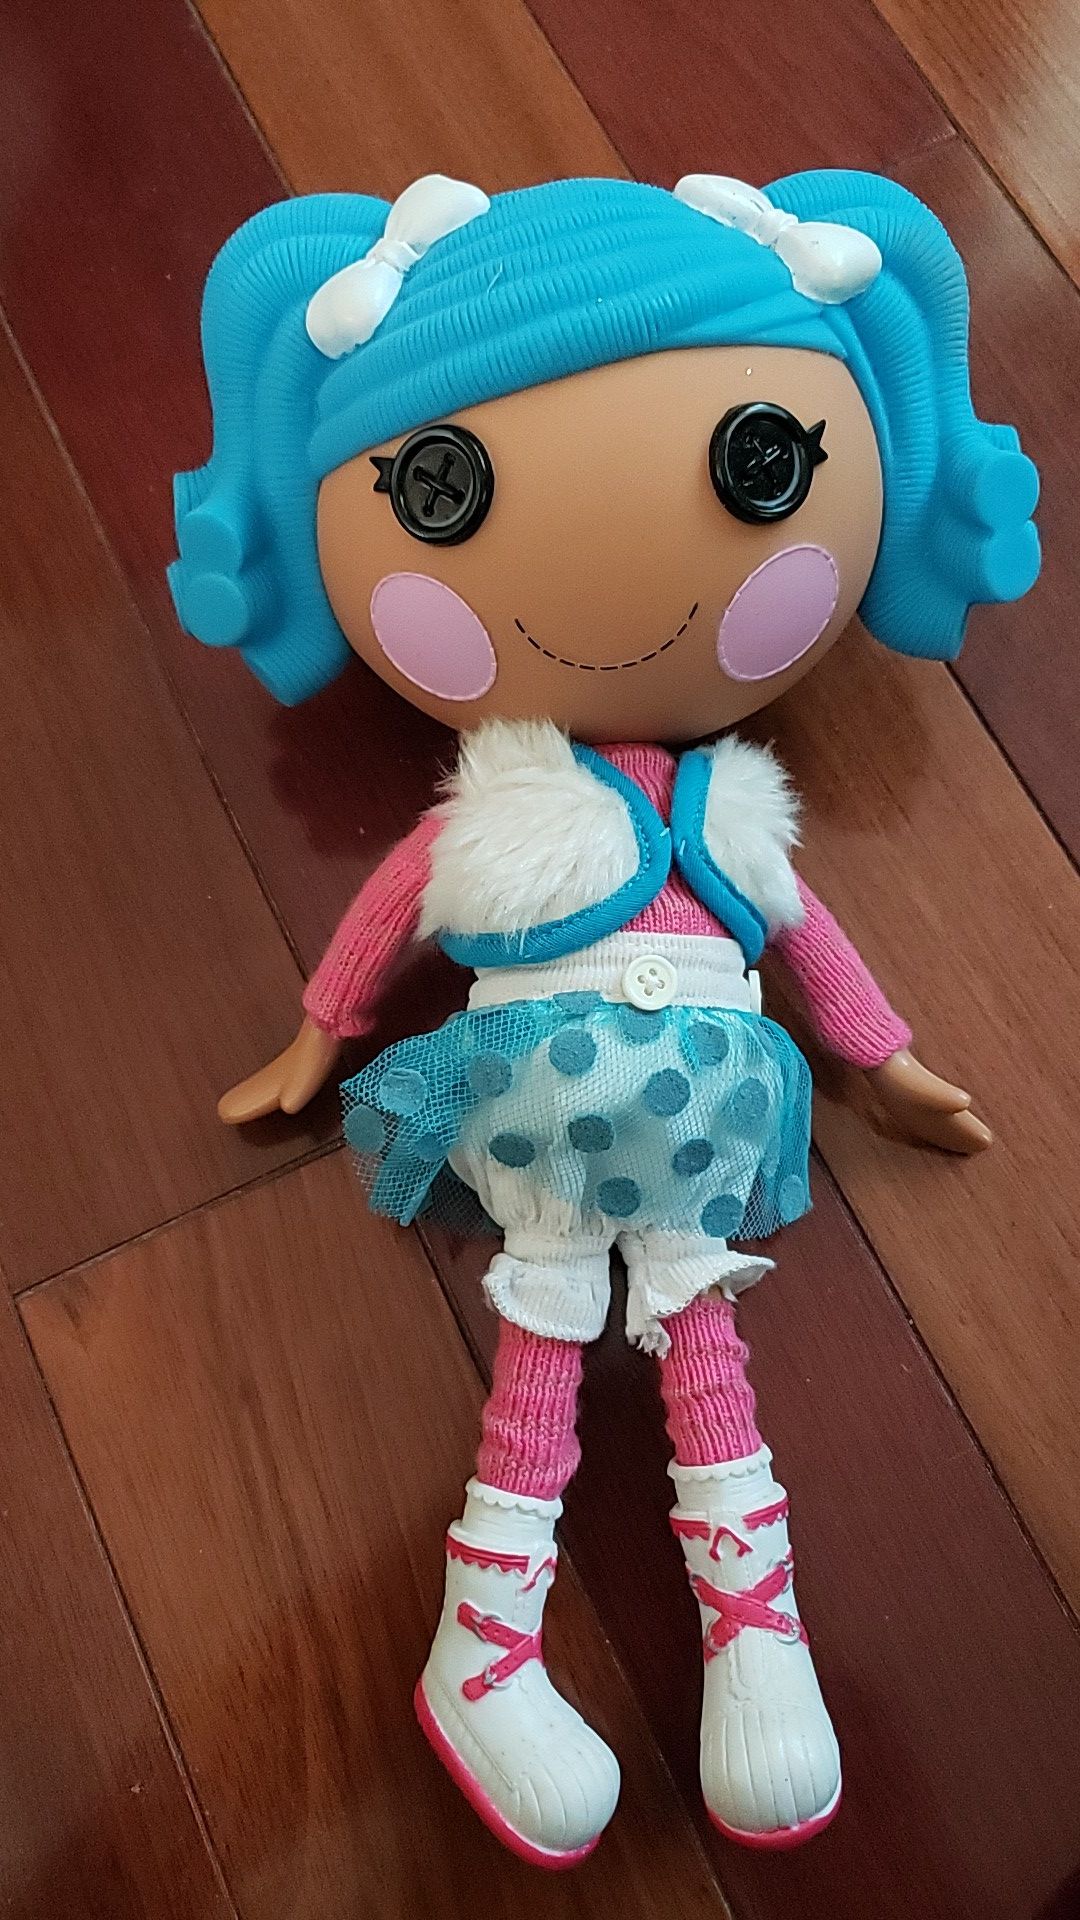 Lalaloopsy character with a lot of accessories on